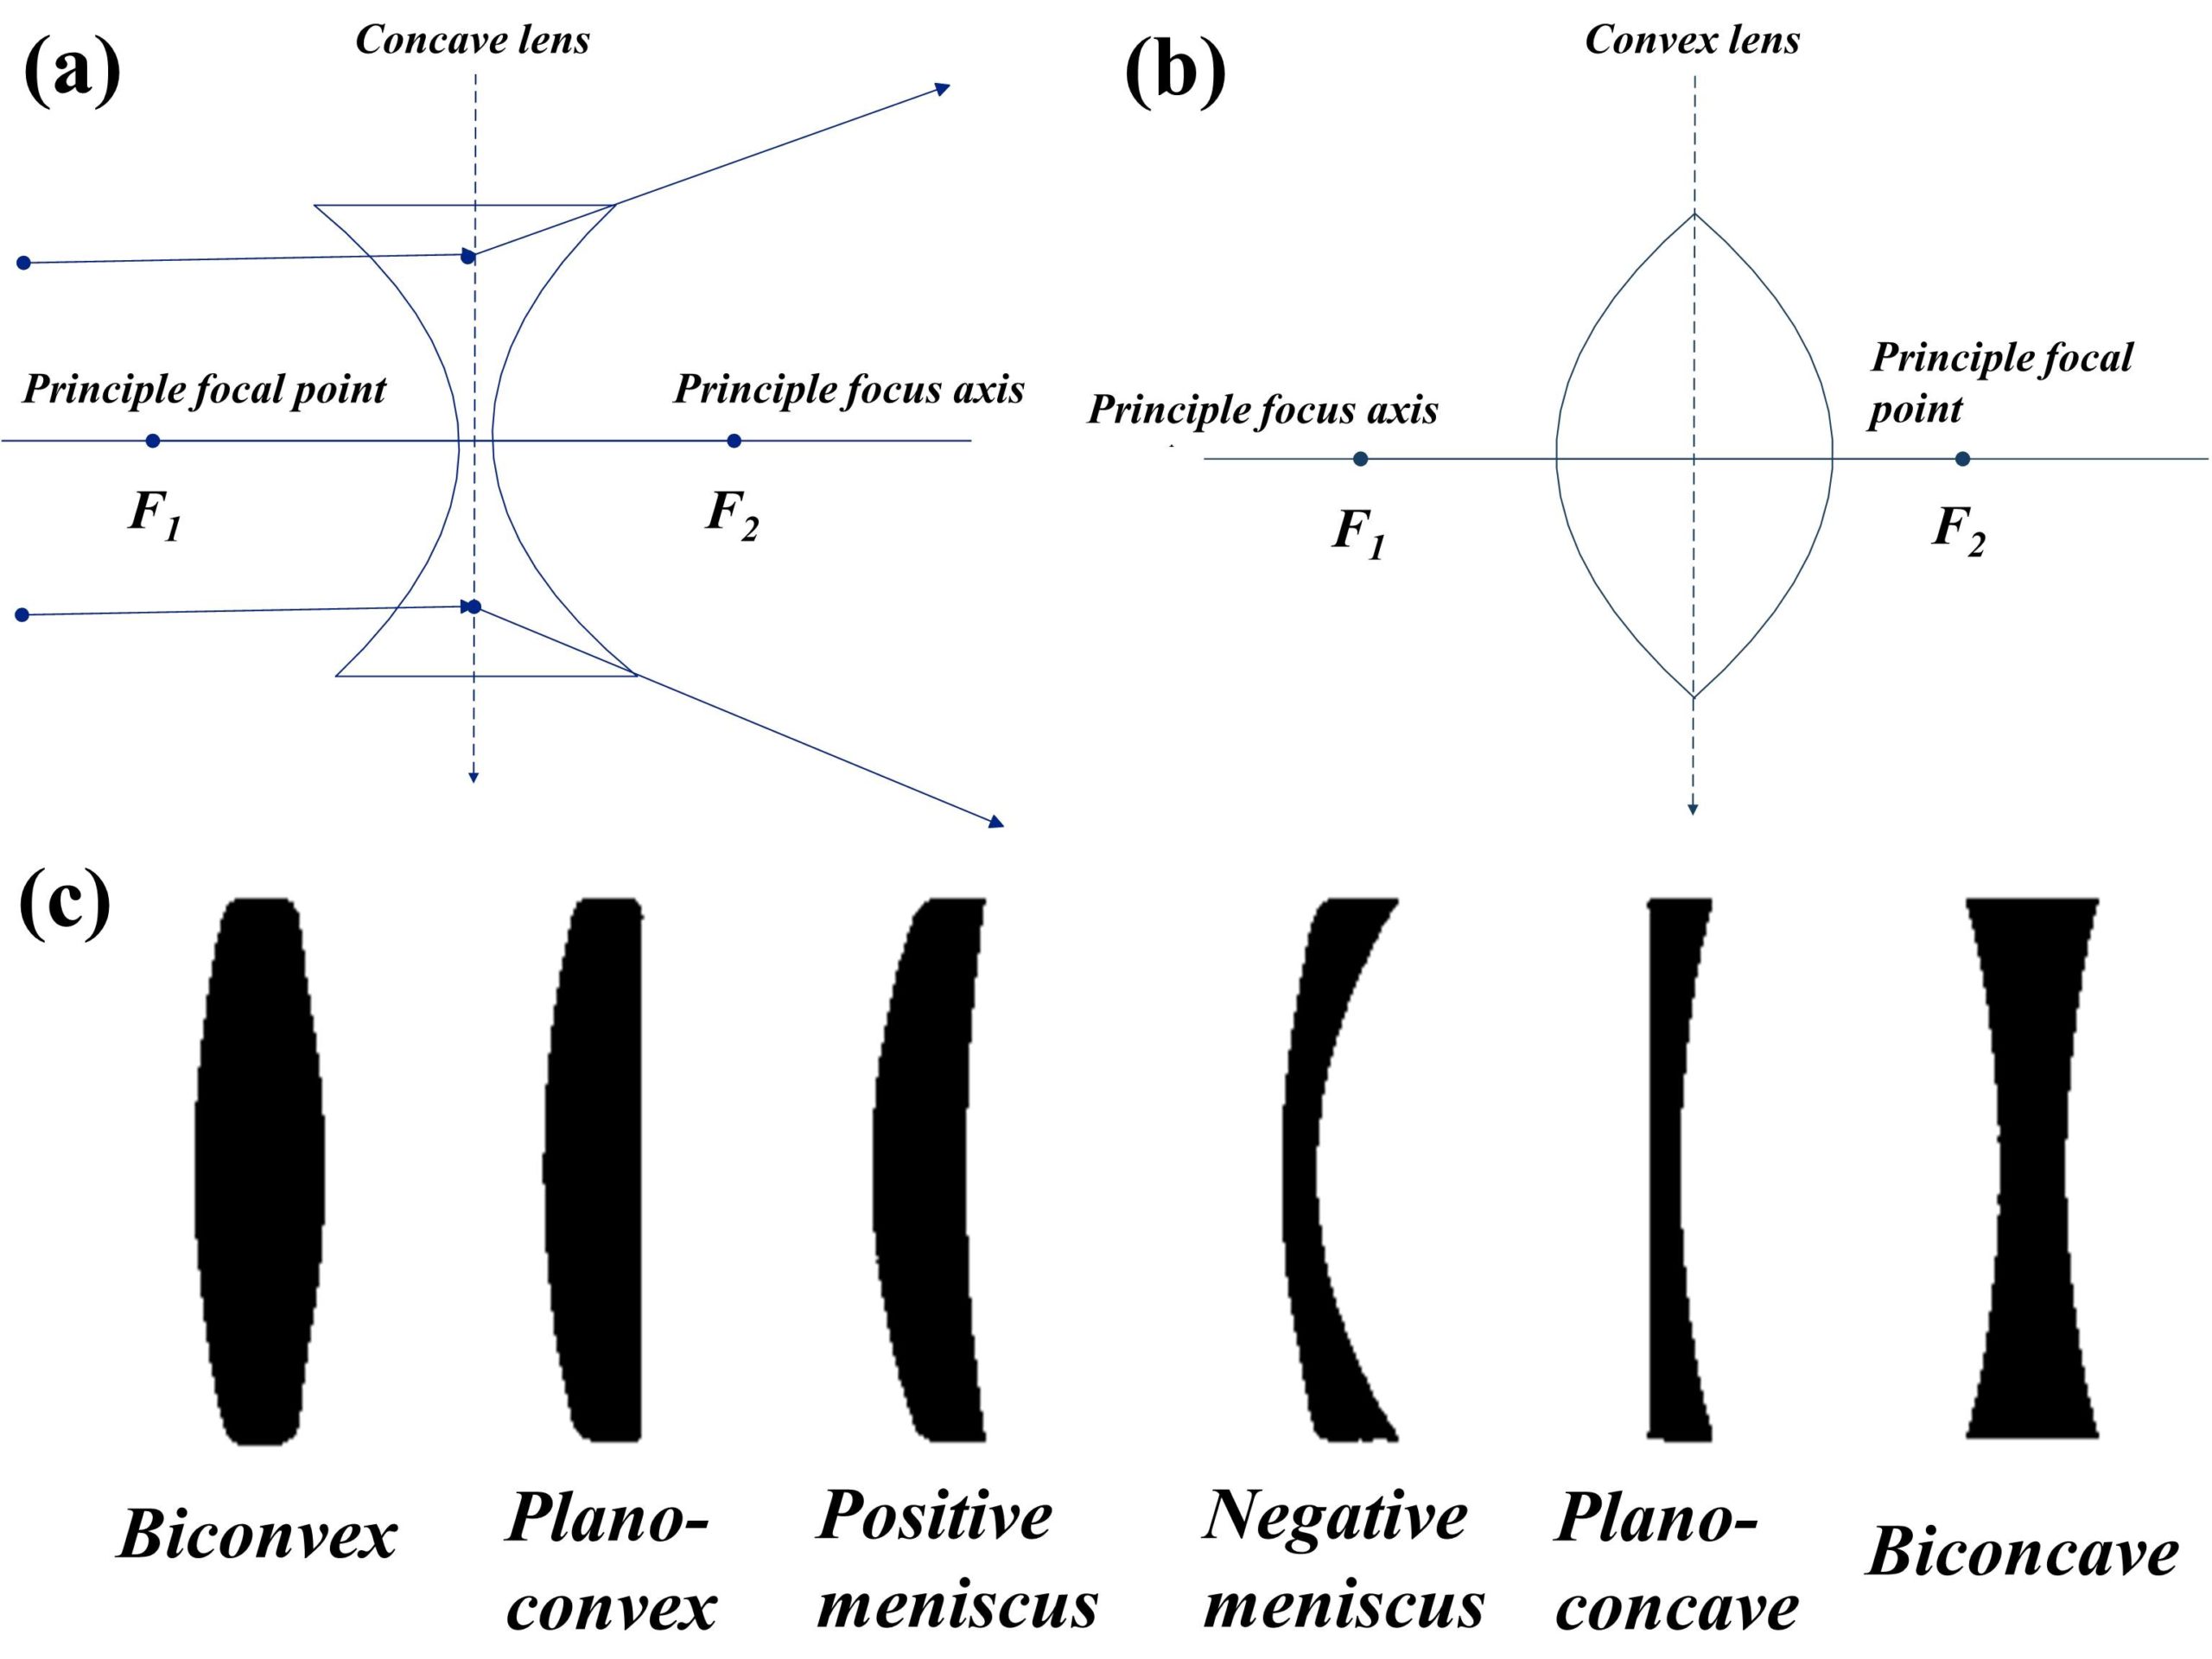 Concave lens (diverging lens), Convex lens (converging lens), and different types of concave and convex lenses.